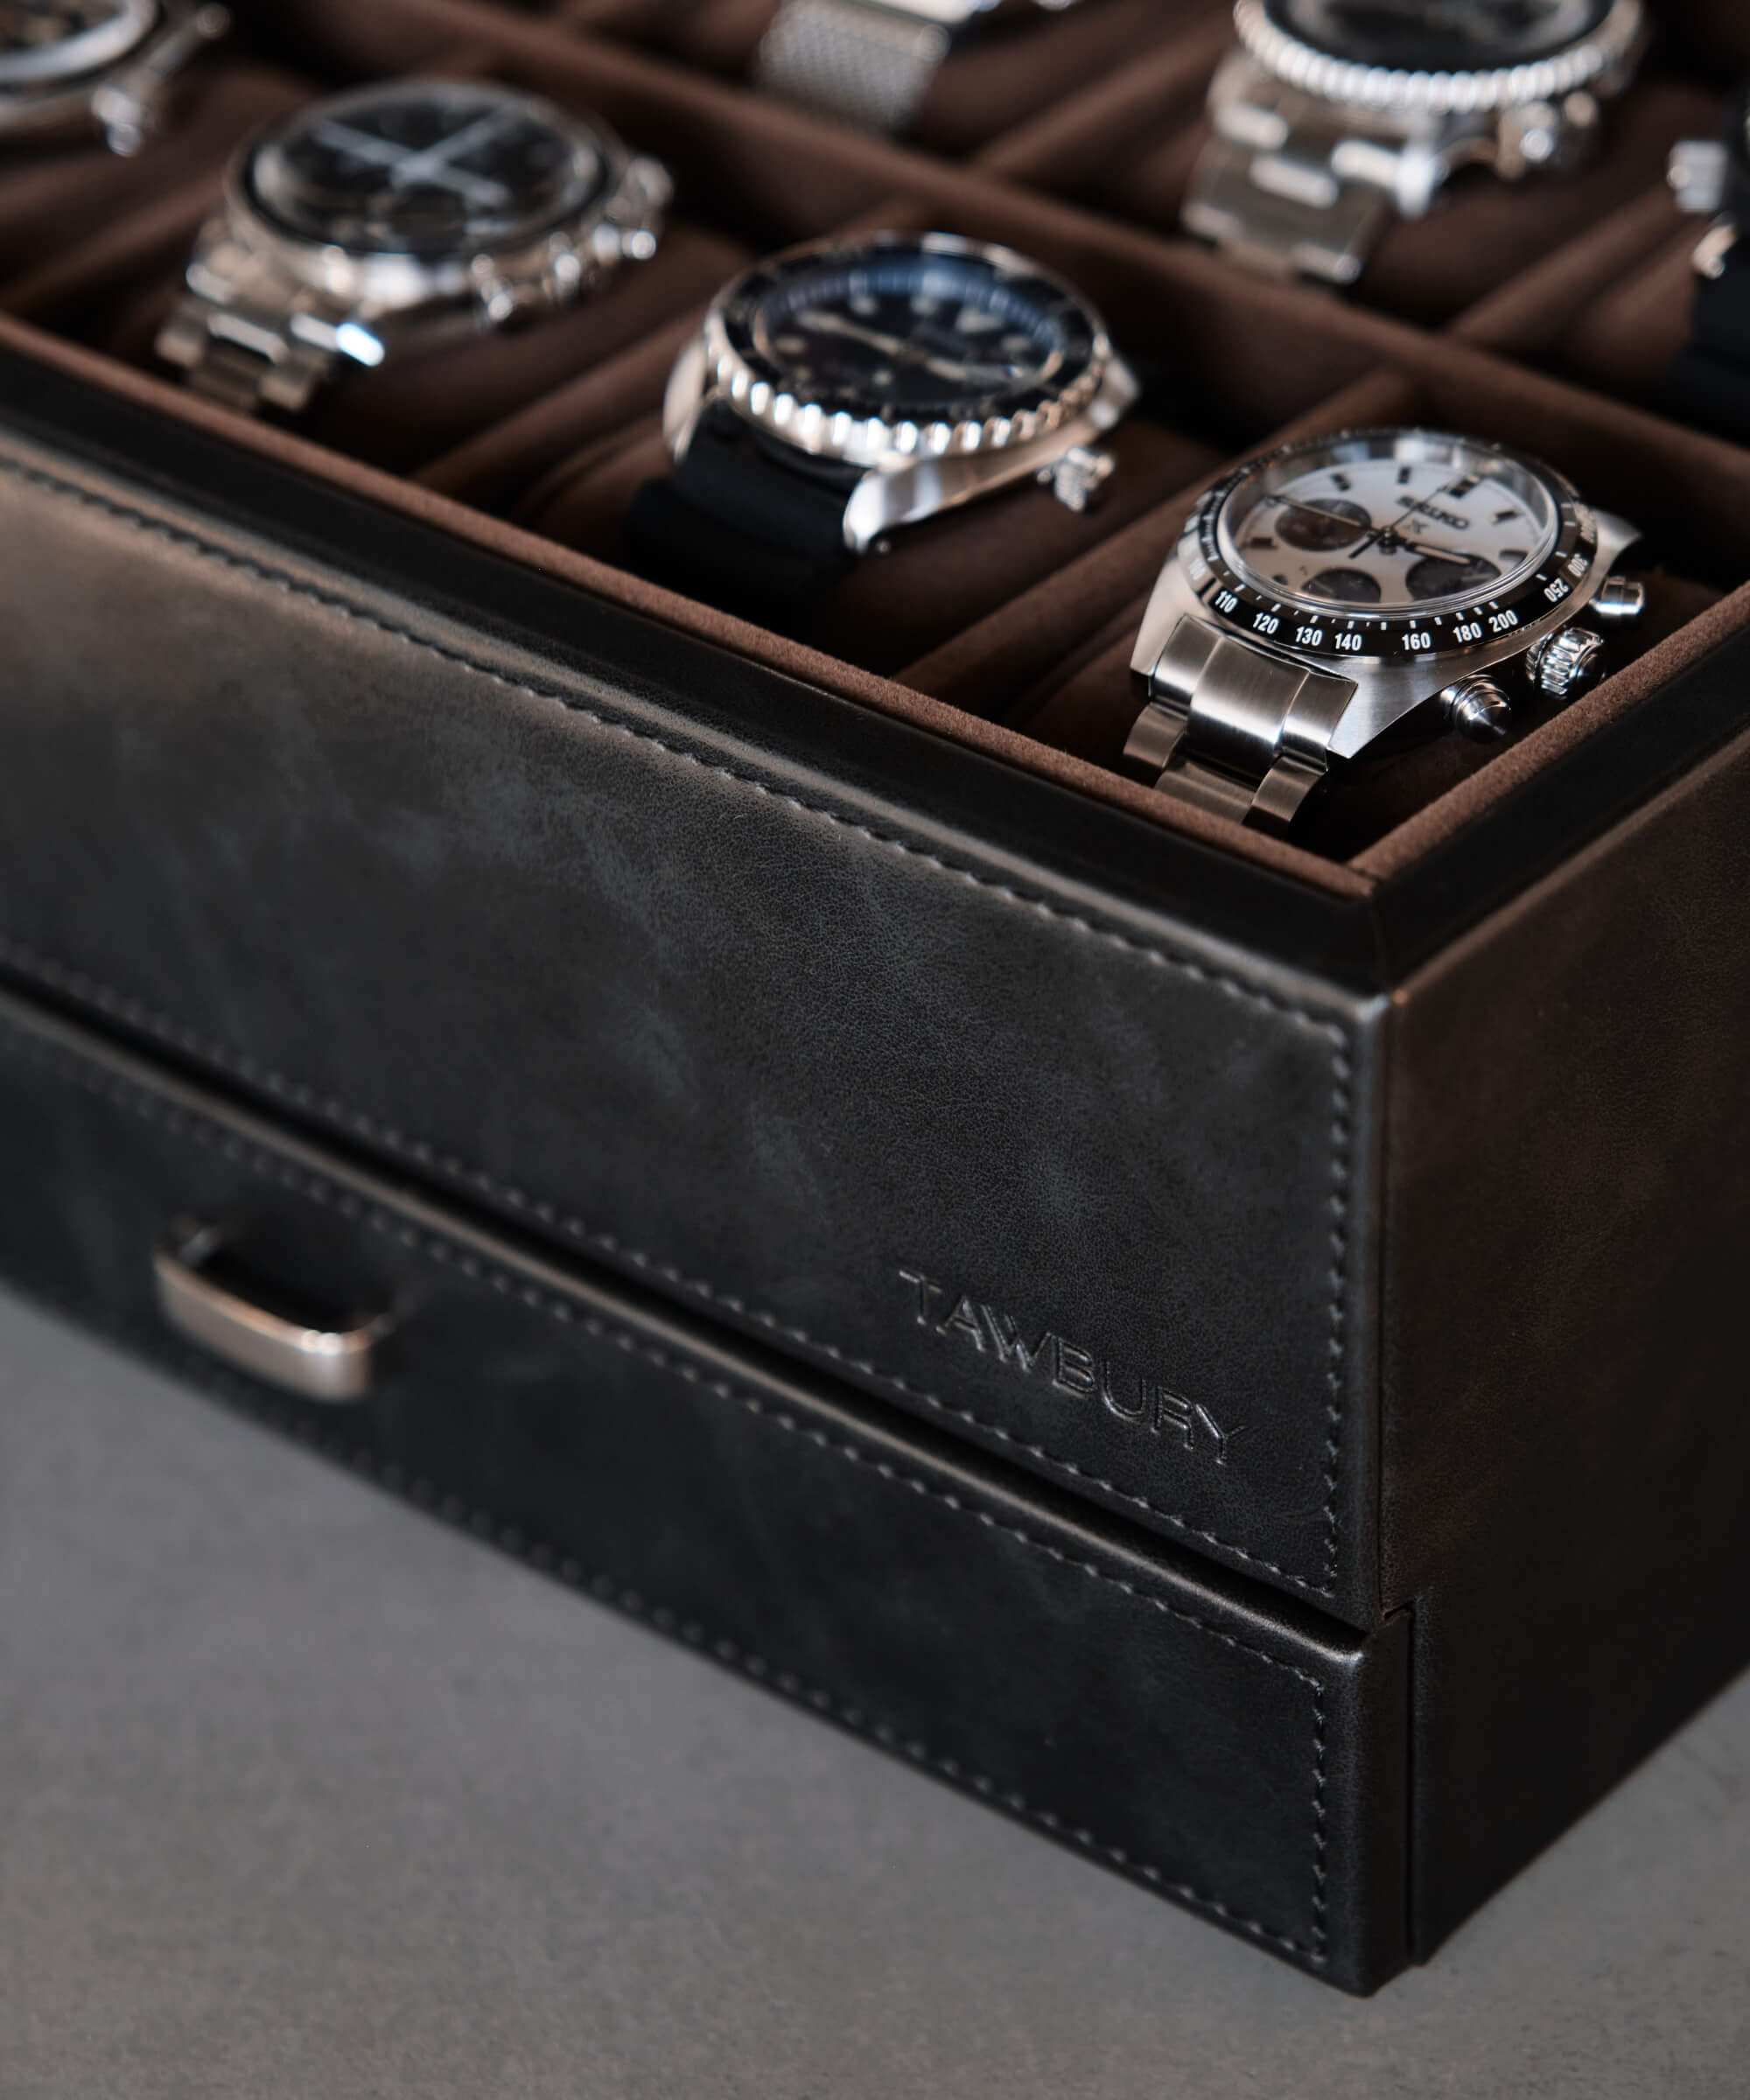 A TAWBURY Bayswater 8 Slot Watch Box with Drawer - Black for men.